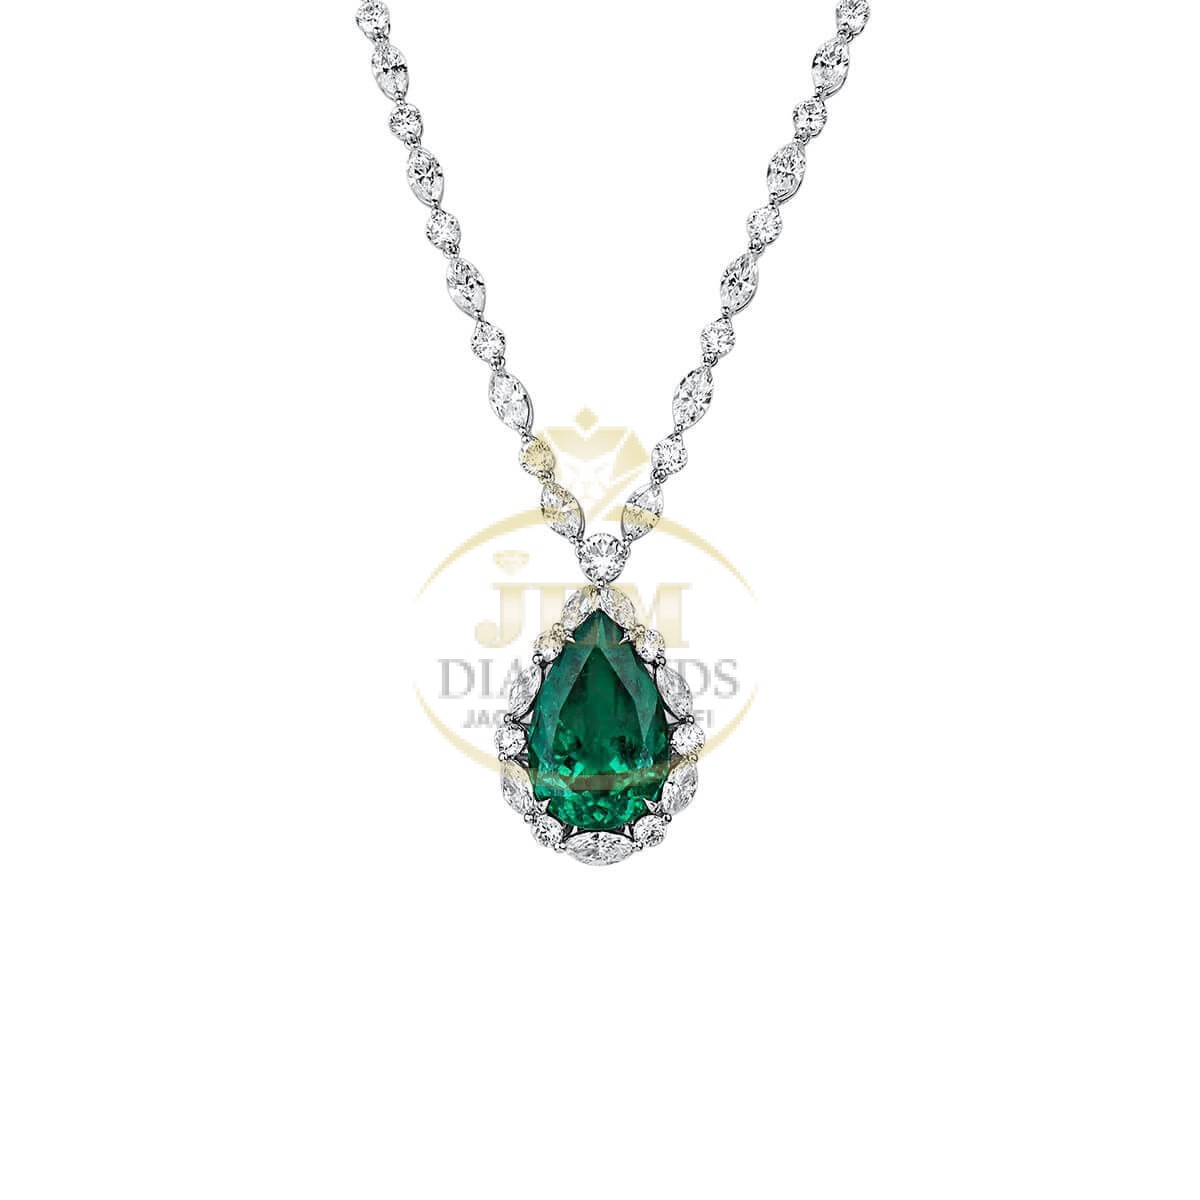 Natural Vivid Green Colombia Emerald Necklace